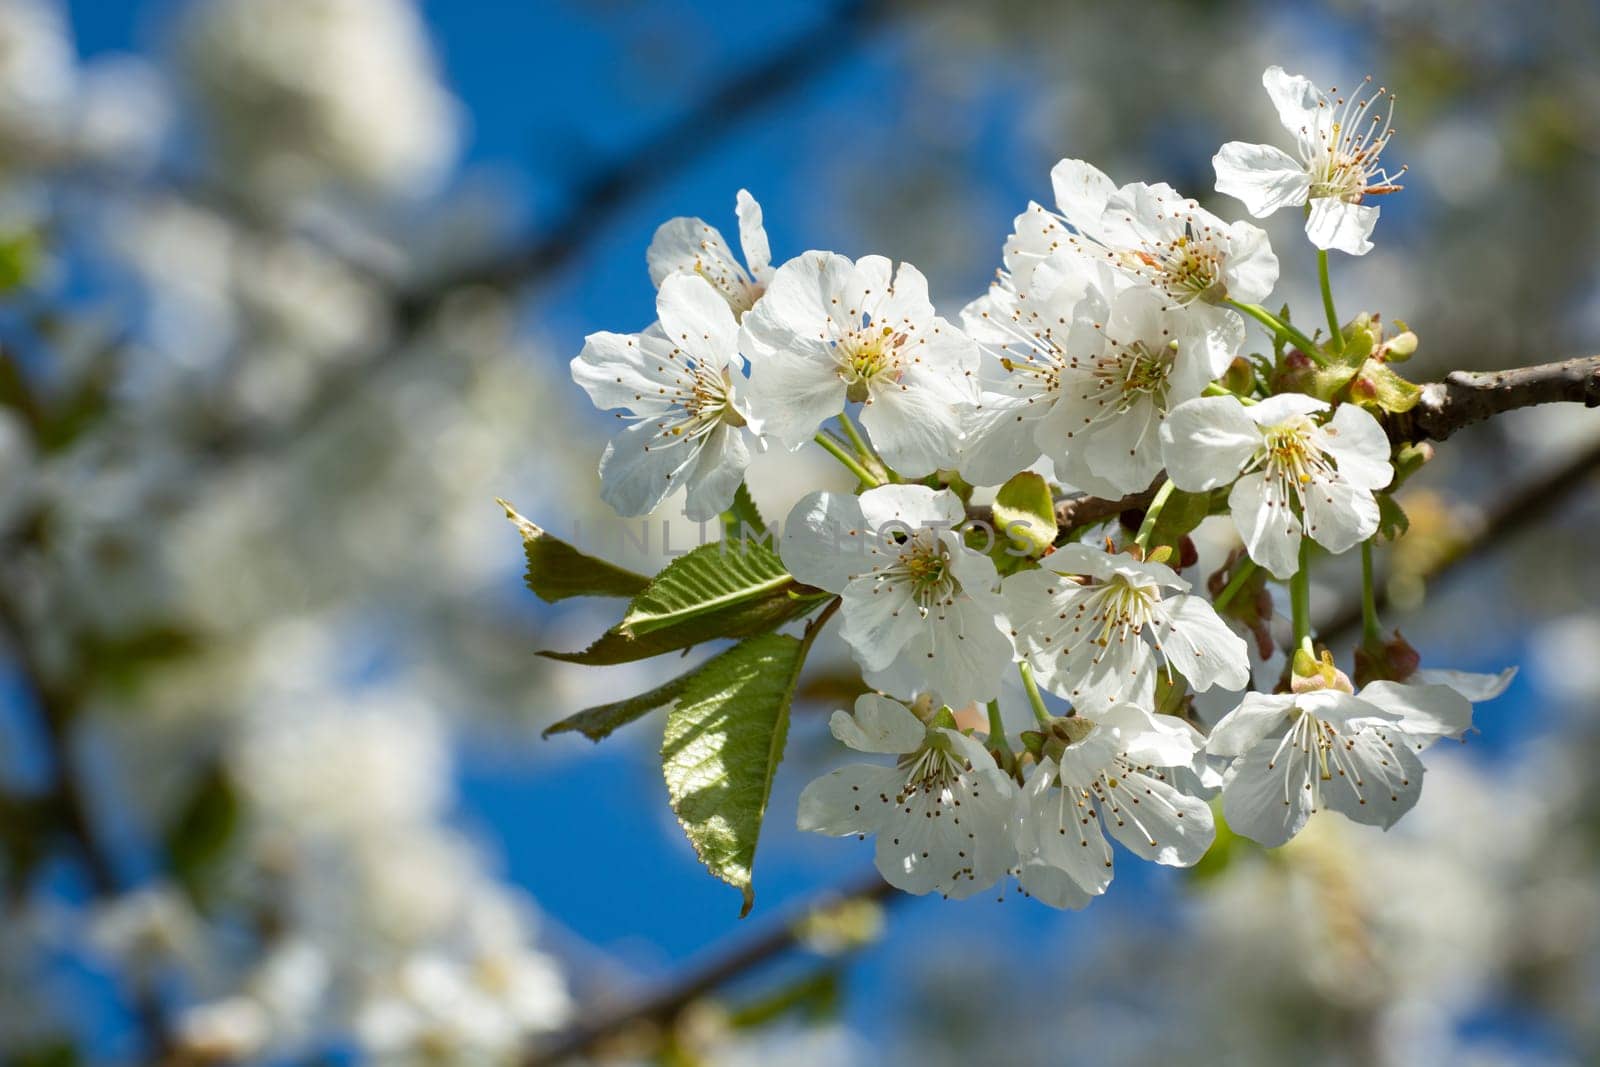 A group of white cherry blossoms on a branch, May view